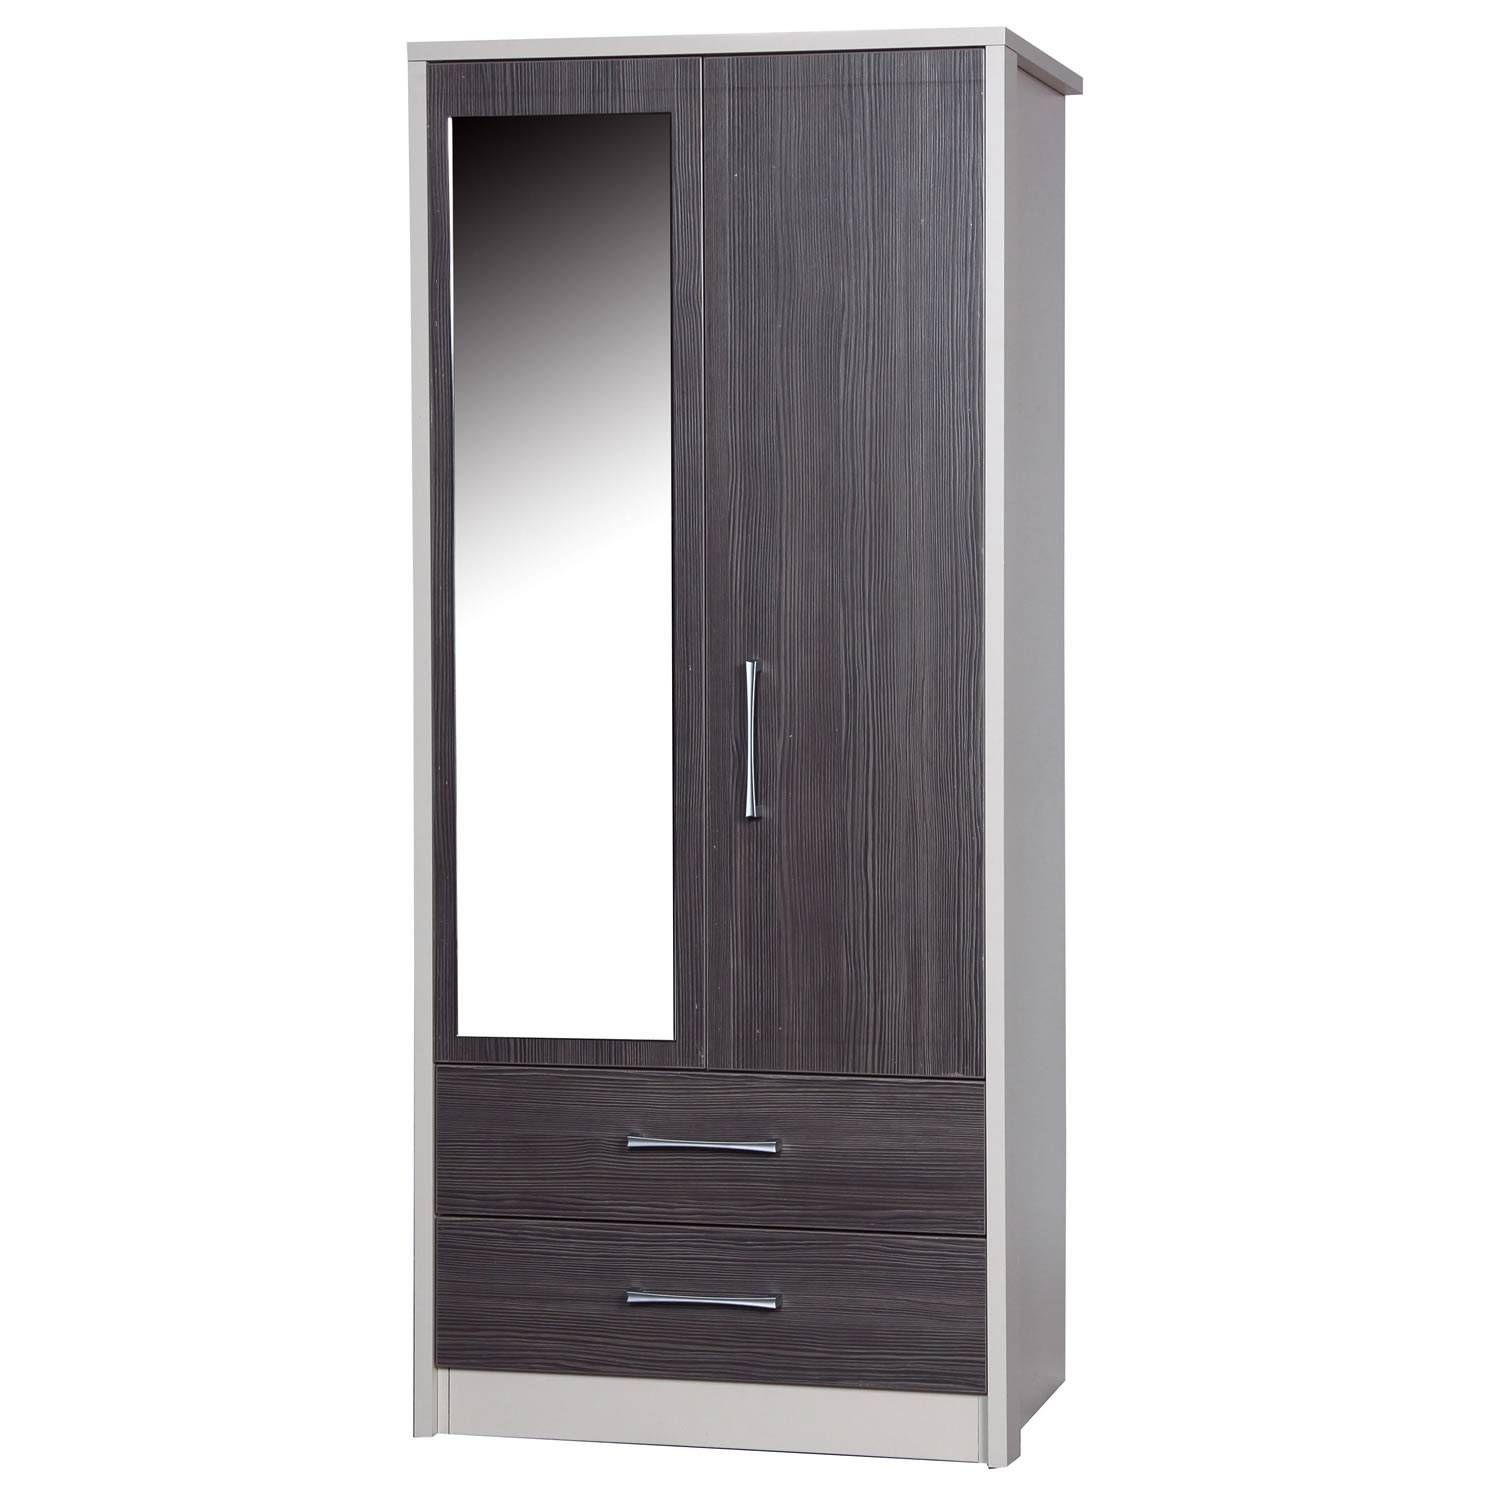 Avola Grey 2 Door 2 Drawer Combi Wardrobe With Mirror – Next Day Intended For White Wardrobes With Drawers And Mirror (View 10 of 15)